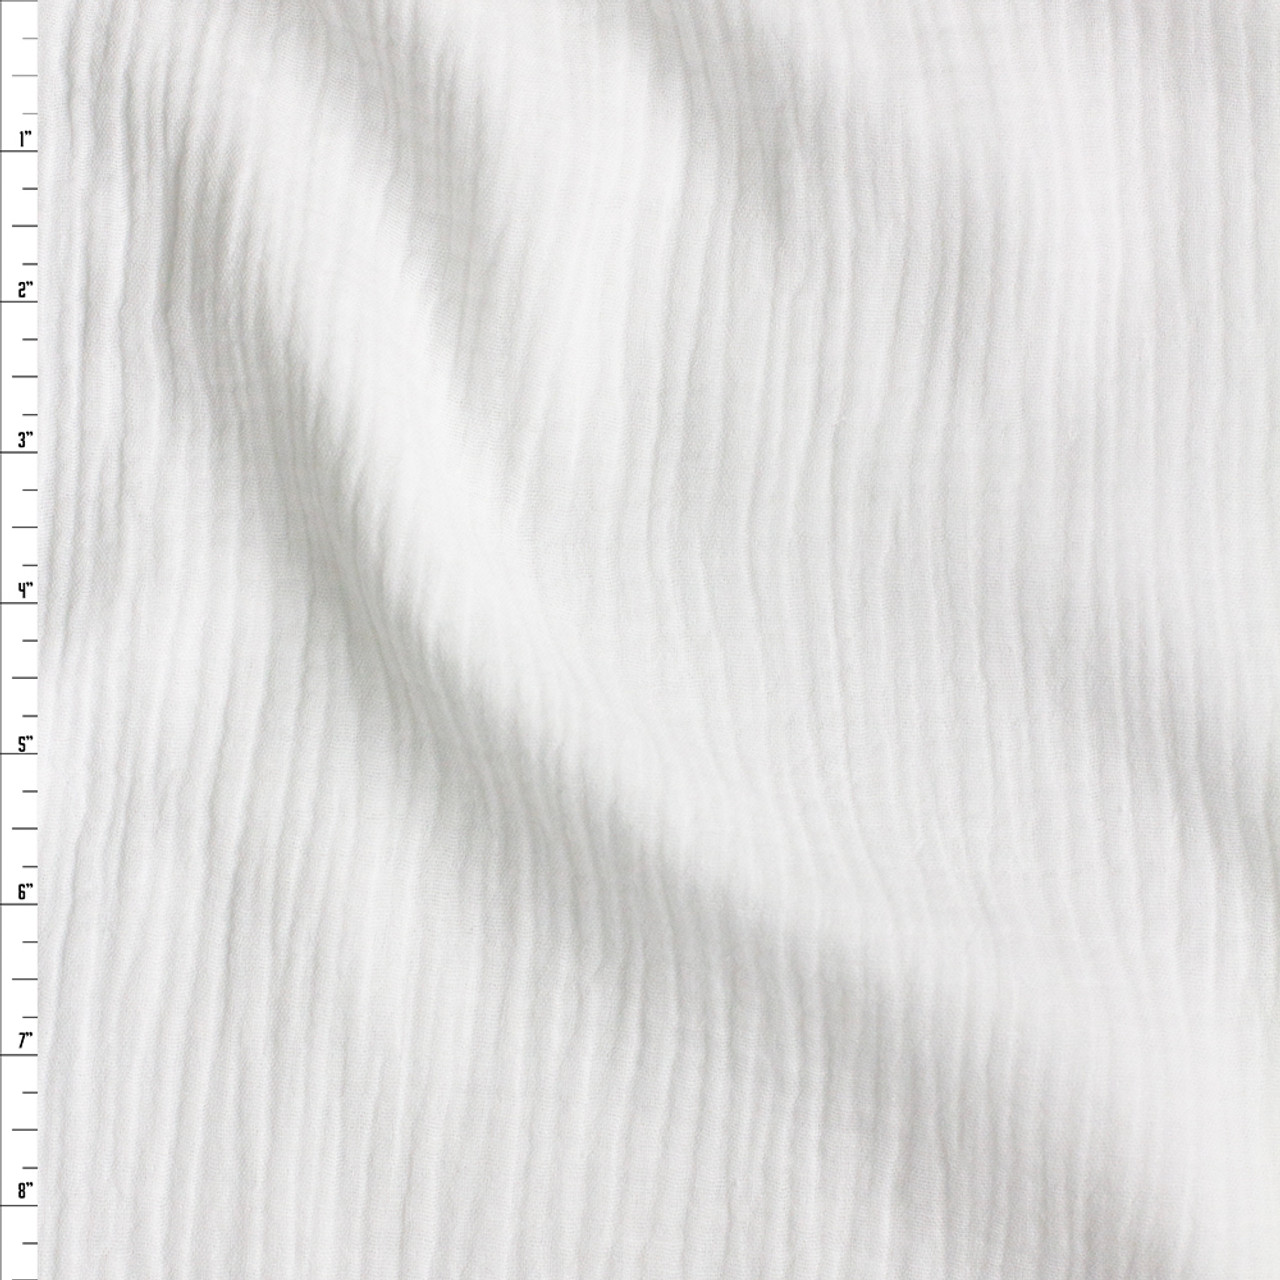 Cotton Gauze White 52 Inch Fabric by The Yard (FE®)